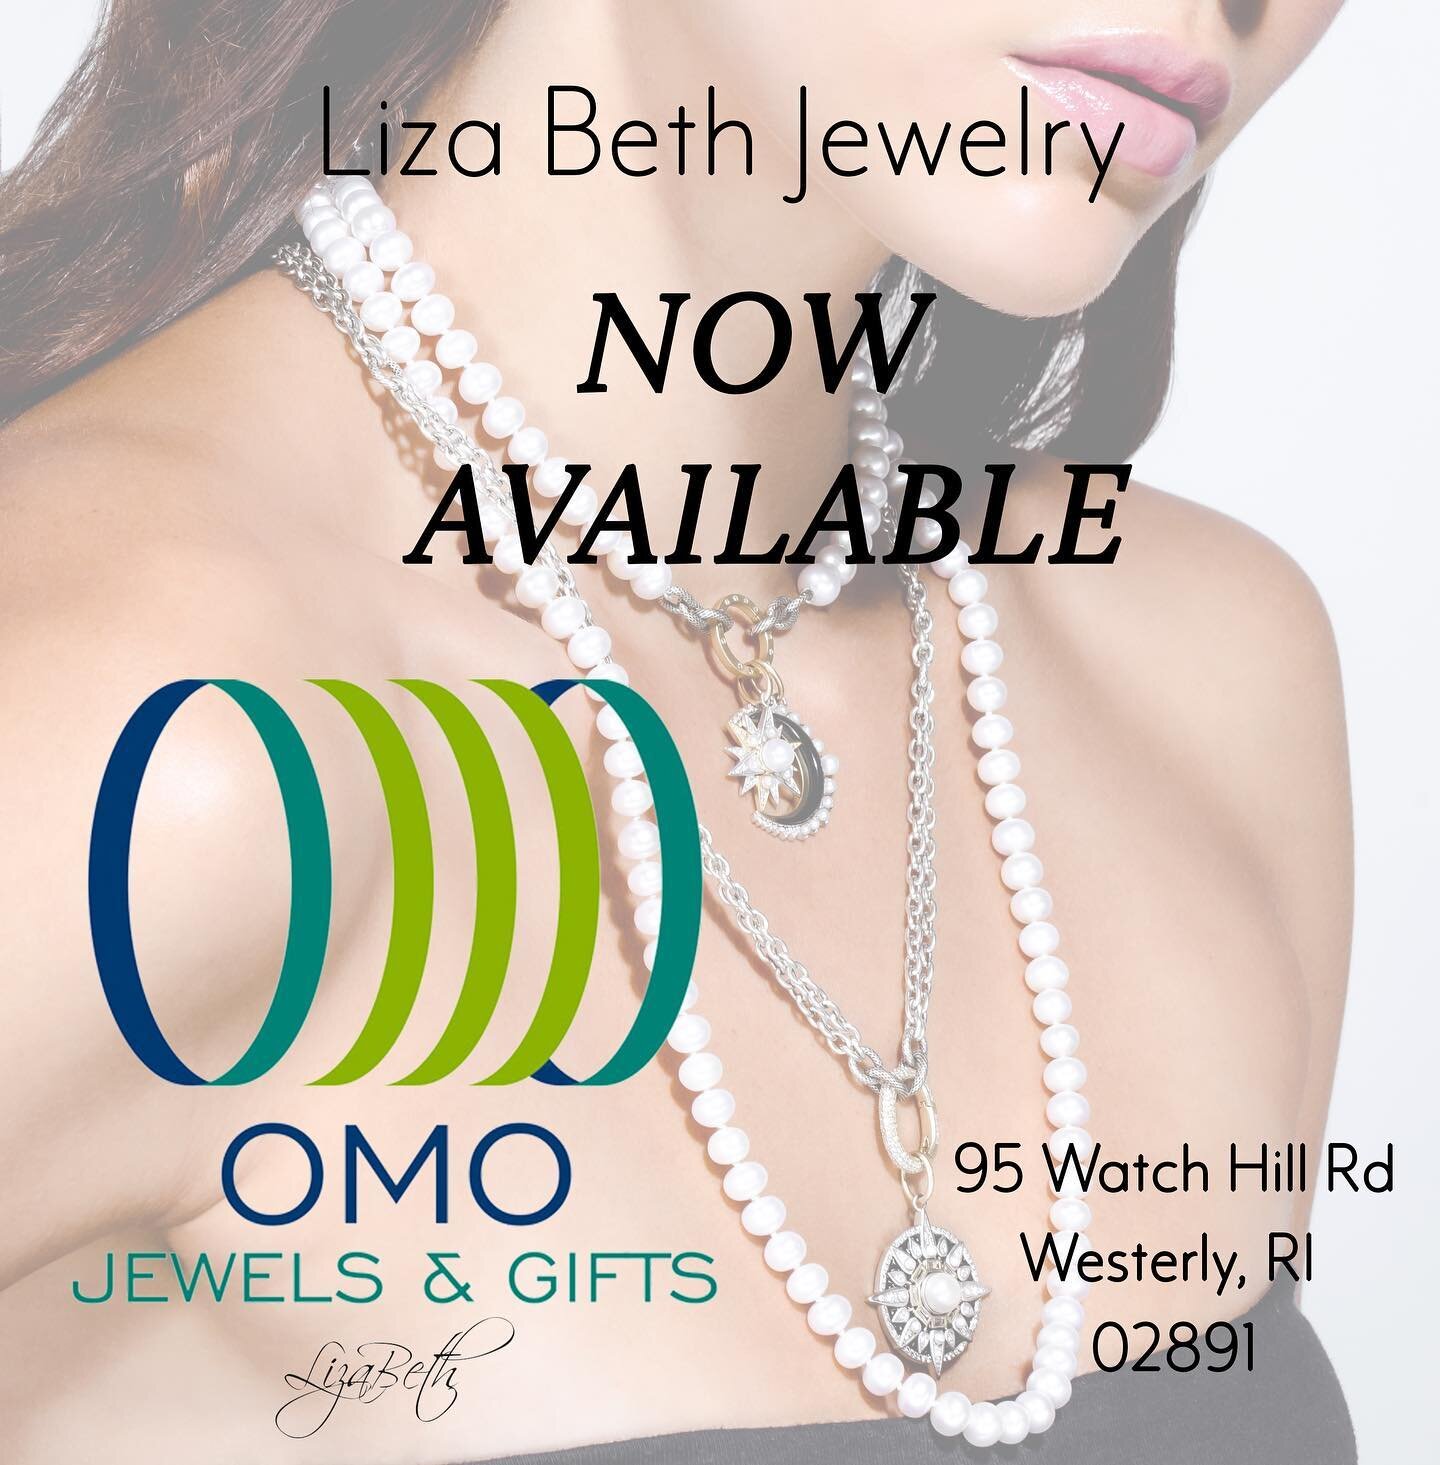 We are so excited to now have Liza Beth Jewelry at OMO in Rhode Island!
.
.
.
.
#rhodeisland #westerly #finejewelry #designerjewelry #diamonds #omojewels #chains #pearls #gold #silver #futureheirlooms #baubles #summerjewelry